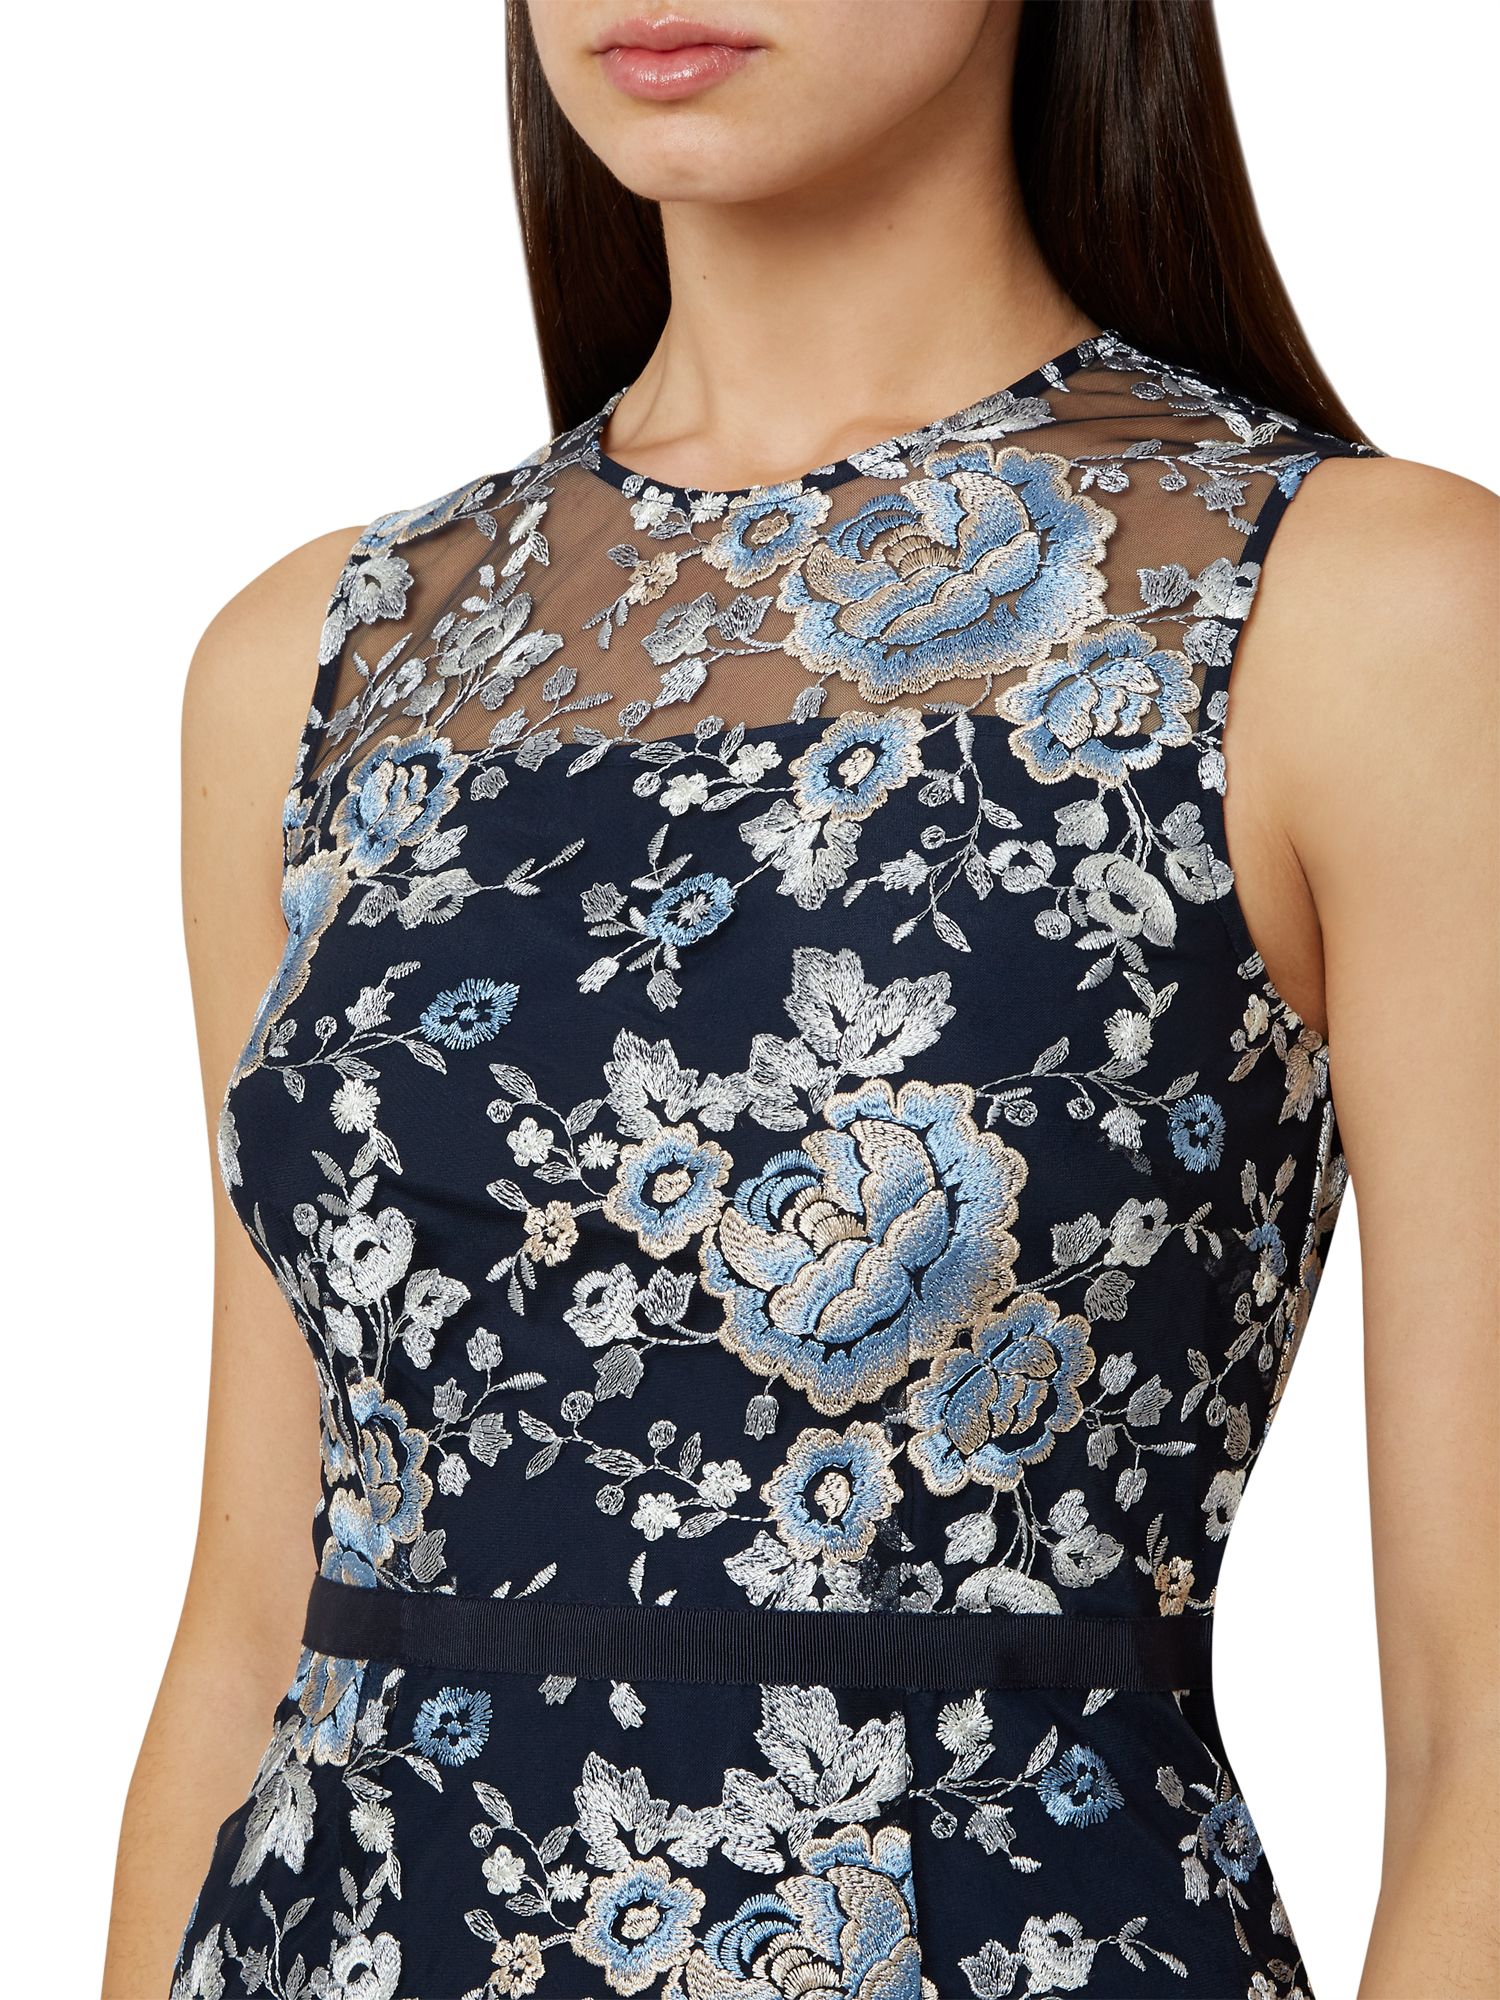 Hobbs Everly Floral Embroidered Dress, Navy/Multi